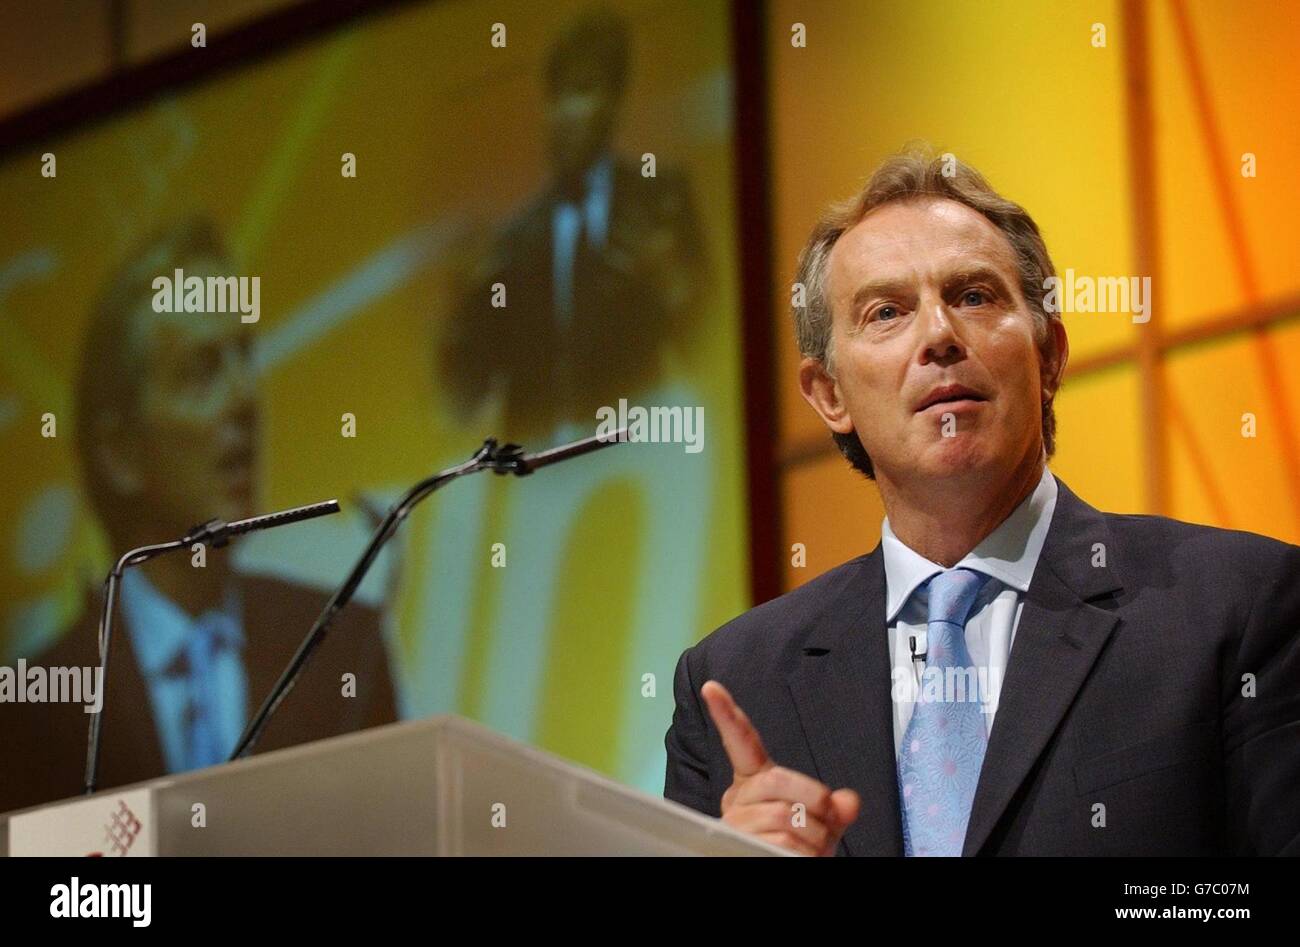 Britain's Prime Minister Tony Blair during his speech to the TUC Conference in Brighton. The Government was attacked for failing to repeal anti-union laws amid complaints that workers were still waiting for basic rights seven years after Labour came to power. Stock Photo